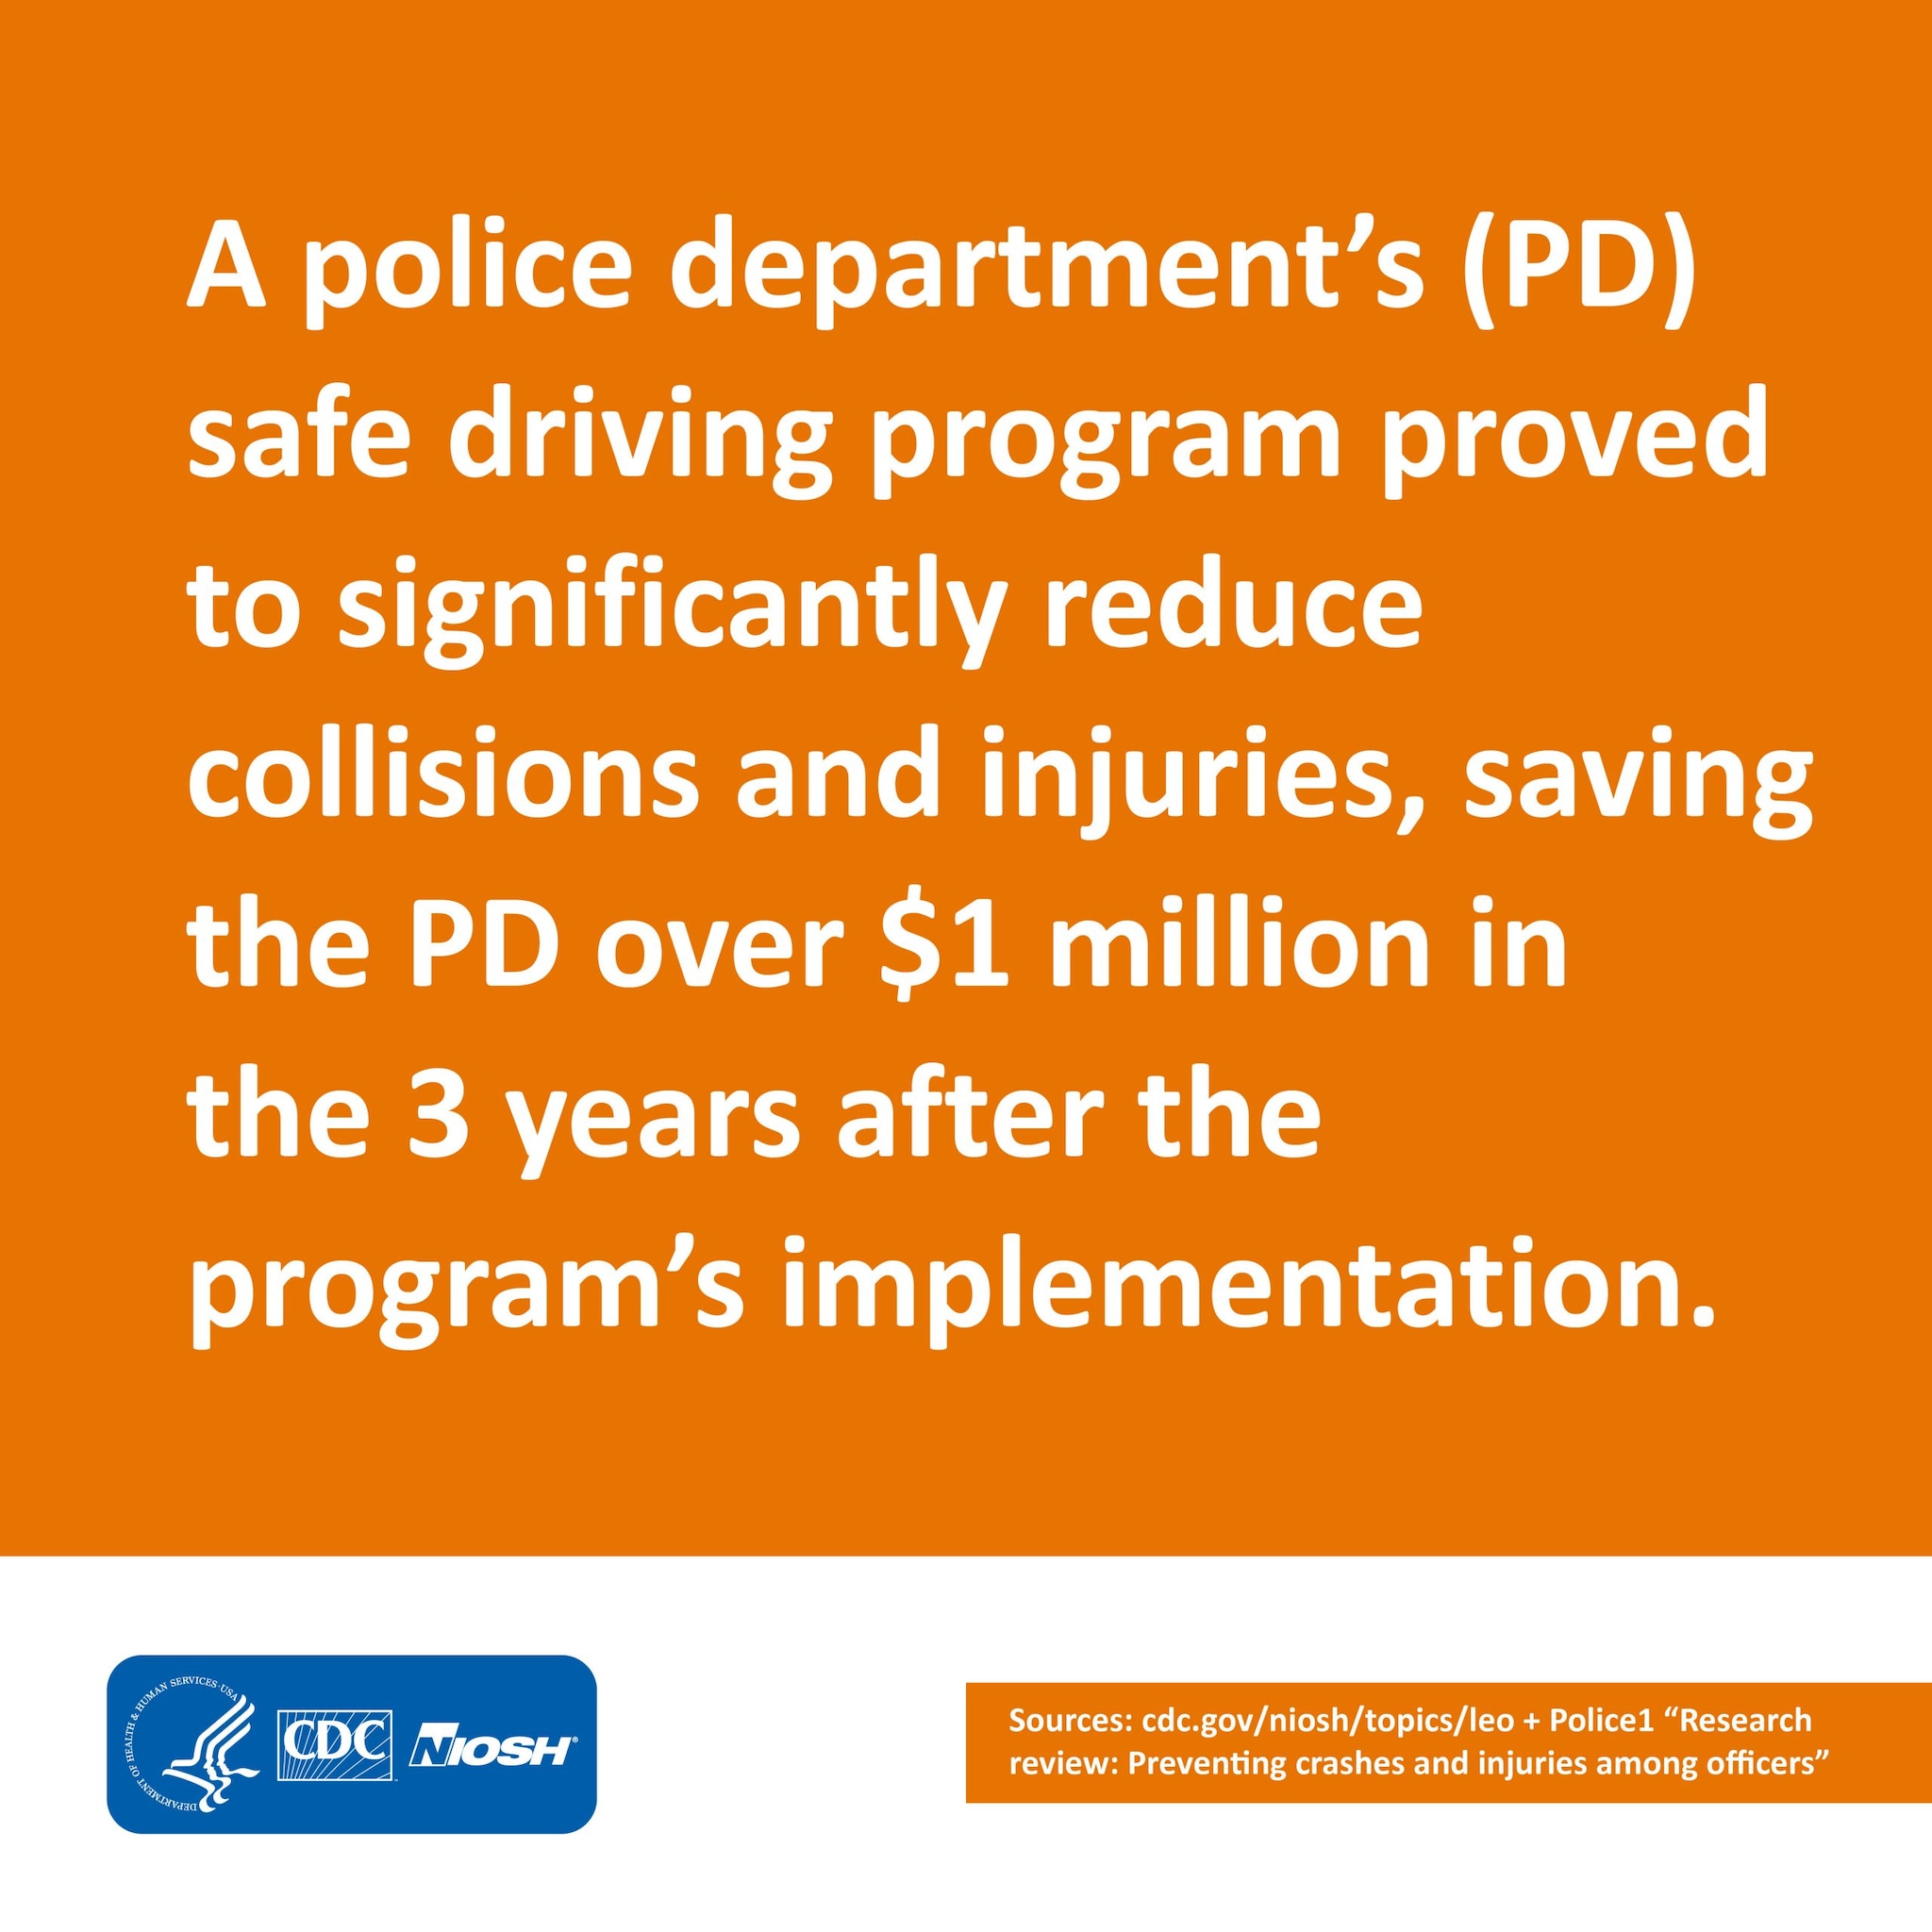 PD safe driving program proved to reduce collisions + injuries, saving the PD over $1 mil in the 3 yrs after implementation